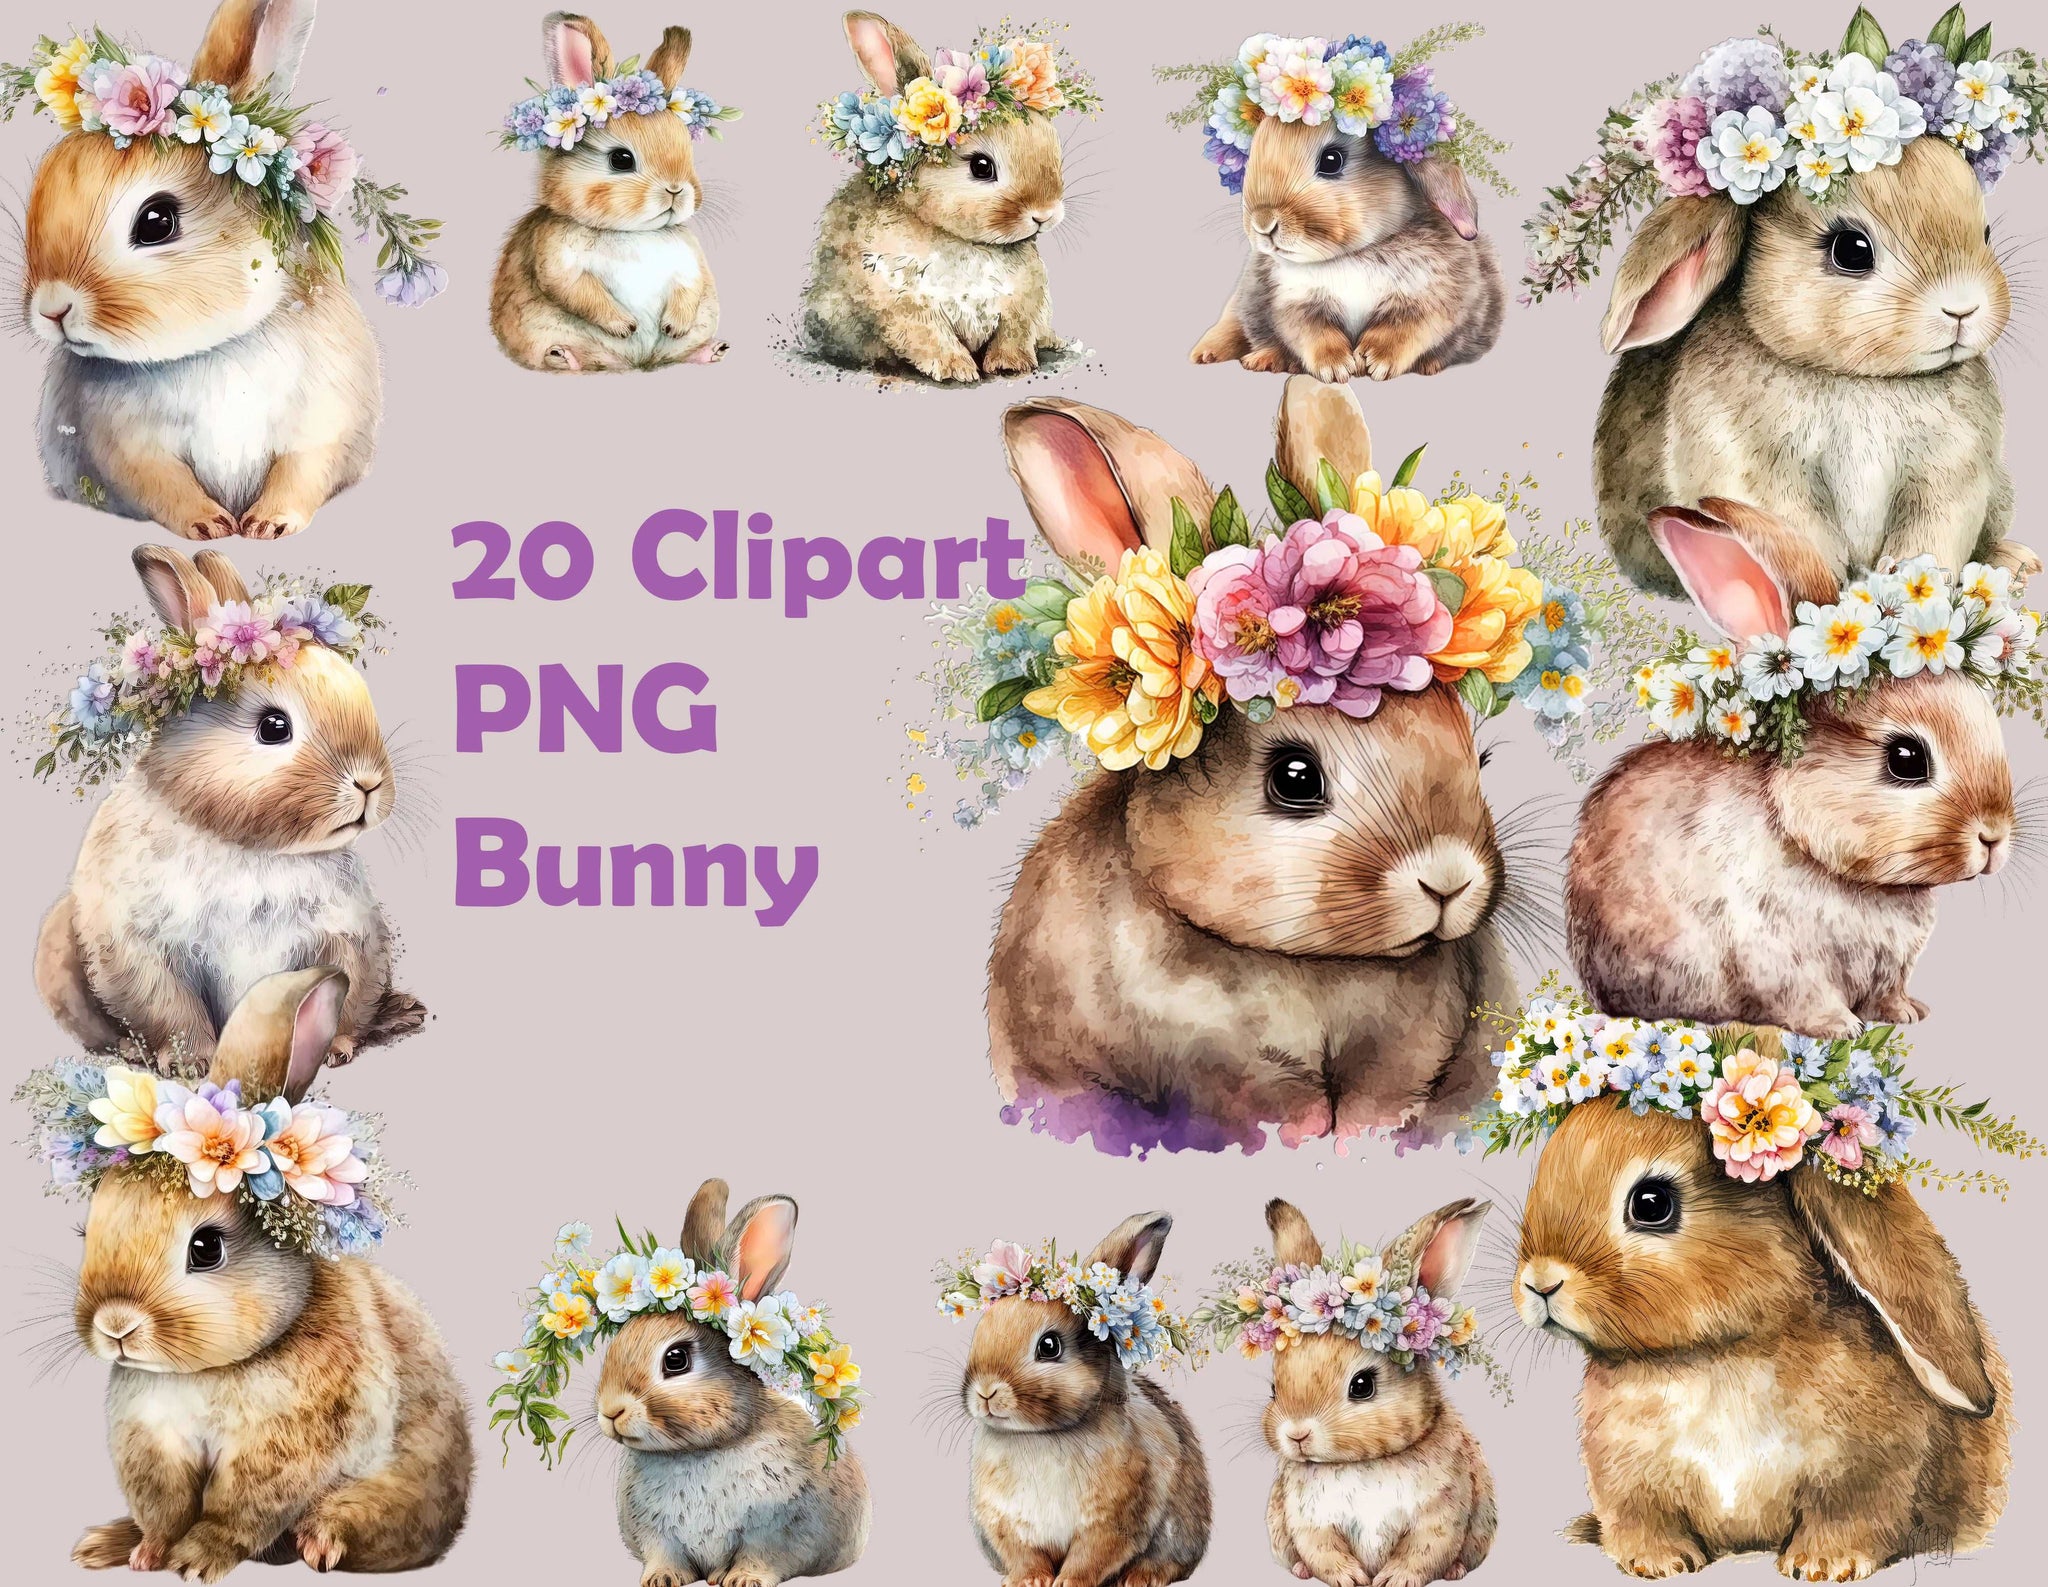 Bundle Easter Baby Bunny Clipart PNG, Cute, Wreath, Spring